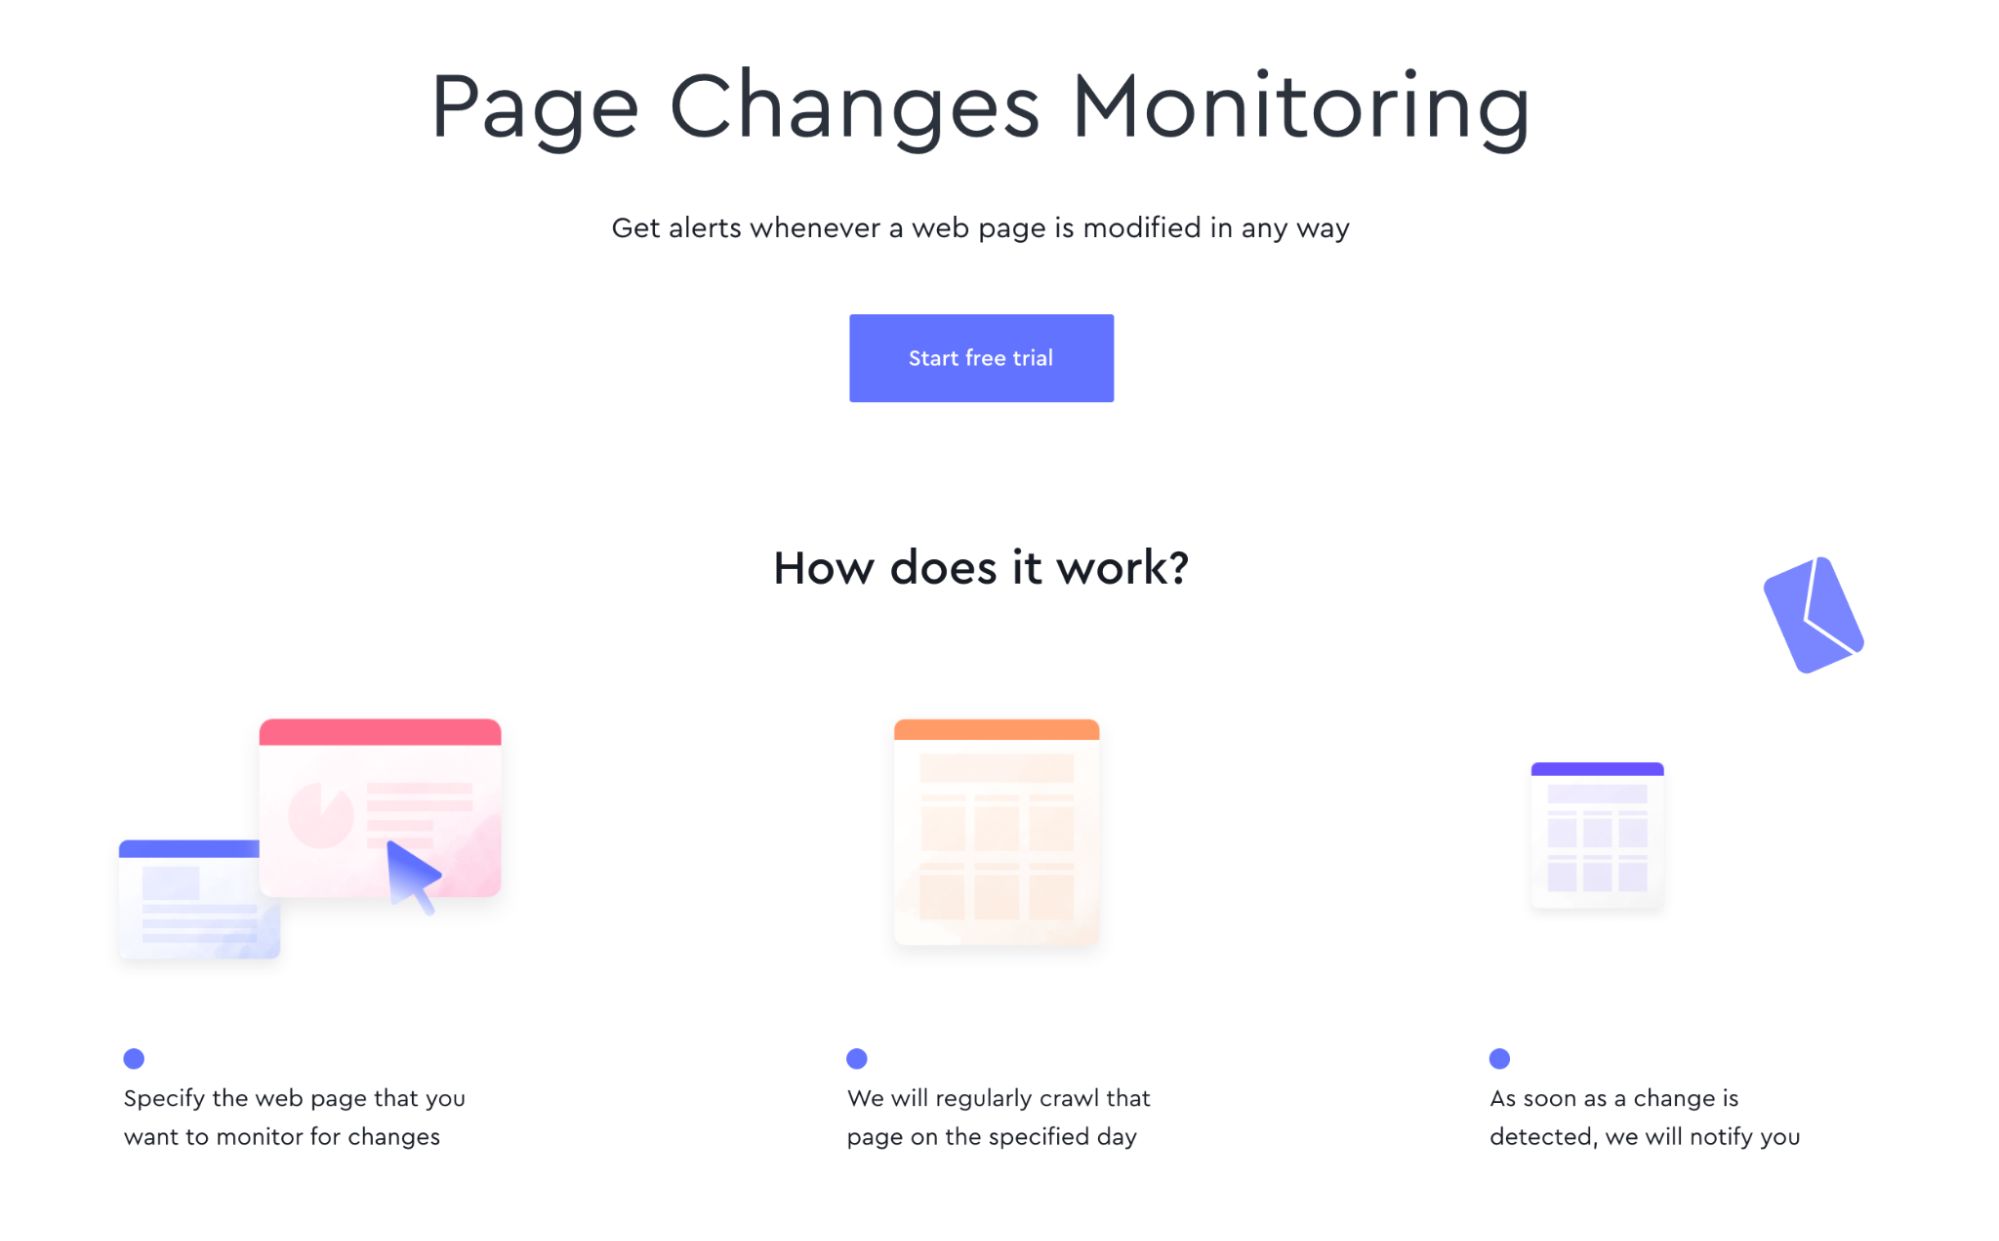 Page changes monitoring